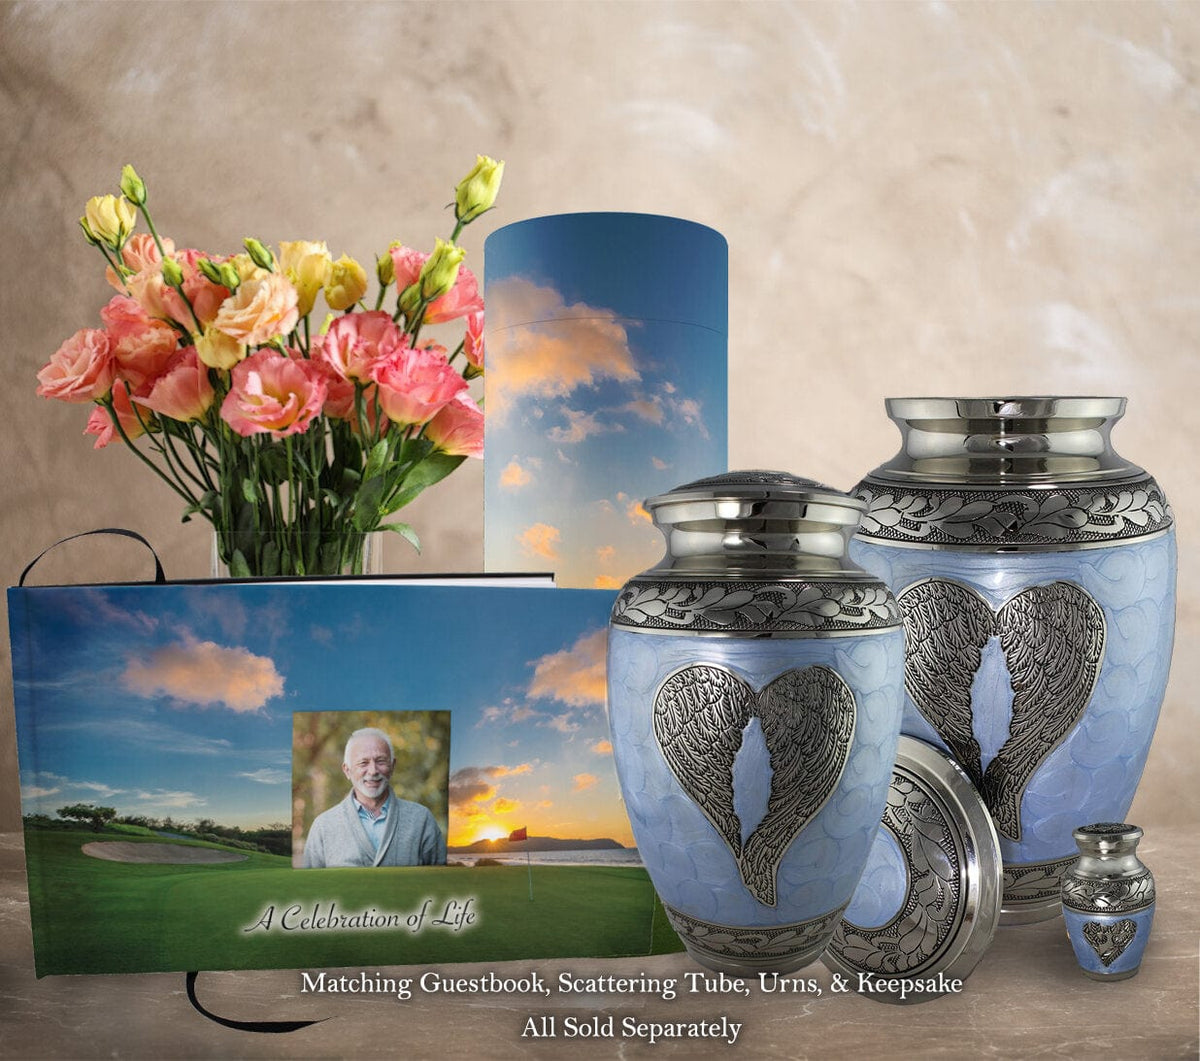 Commemorative Cremation Urns Home &amp; Garden 19th Hole Golf Matching Themed &#39;Celebration of Life&#39; Guest Book for Funeral or Memorial Service